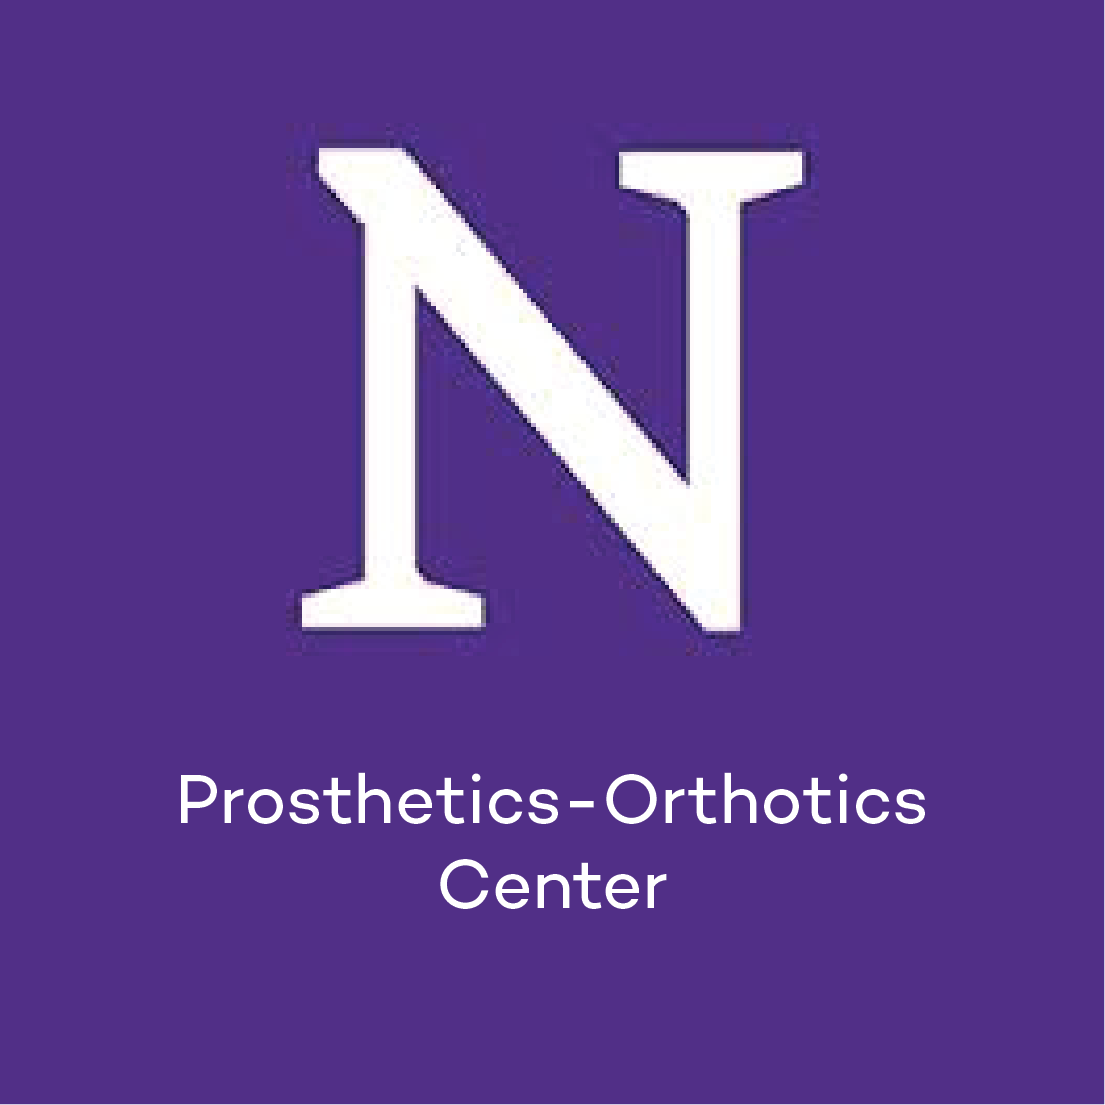 Prostheses and Orthoses Center